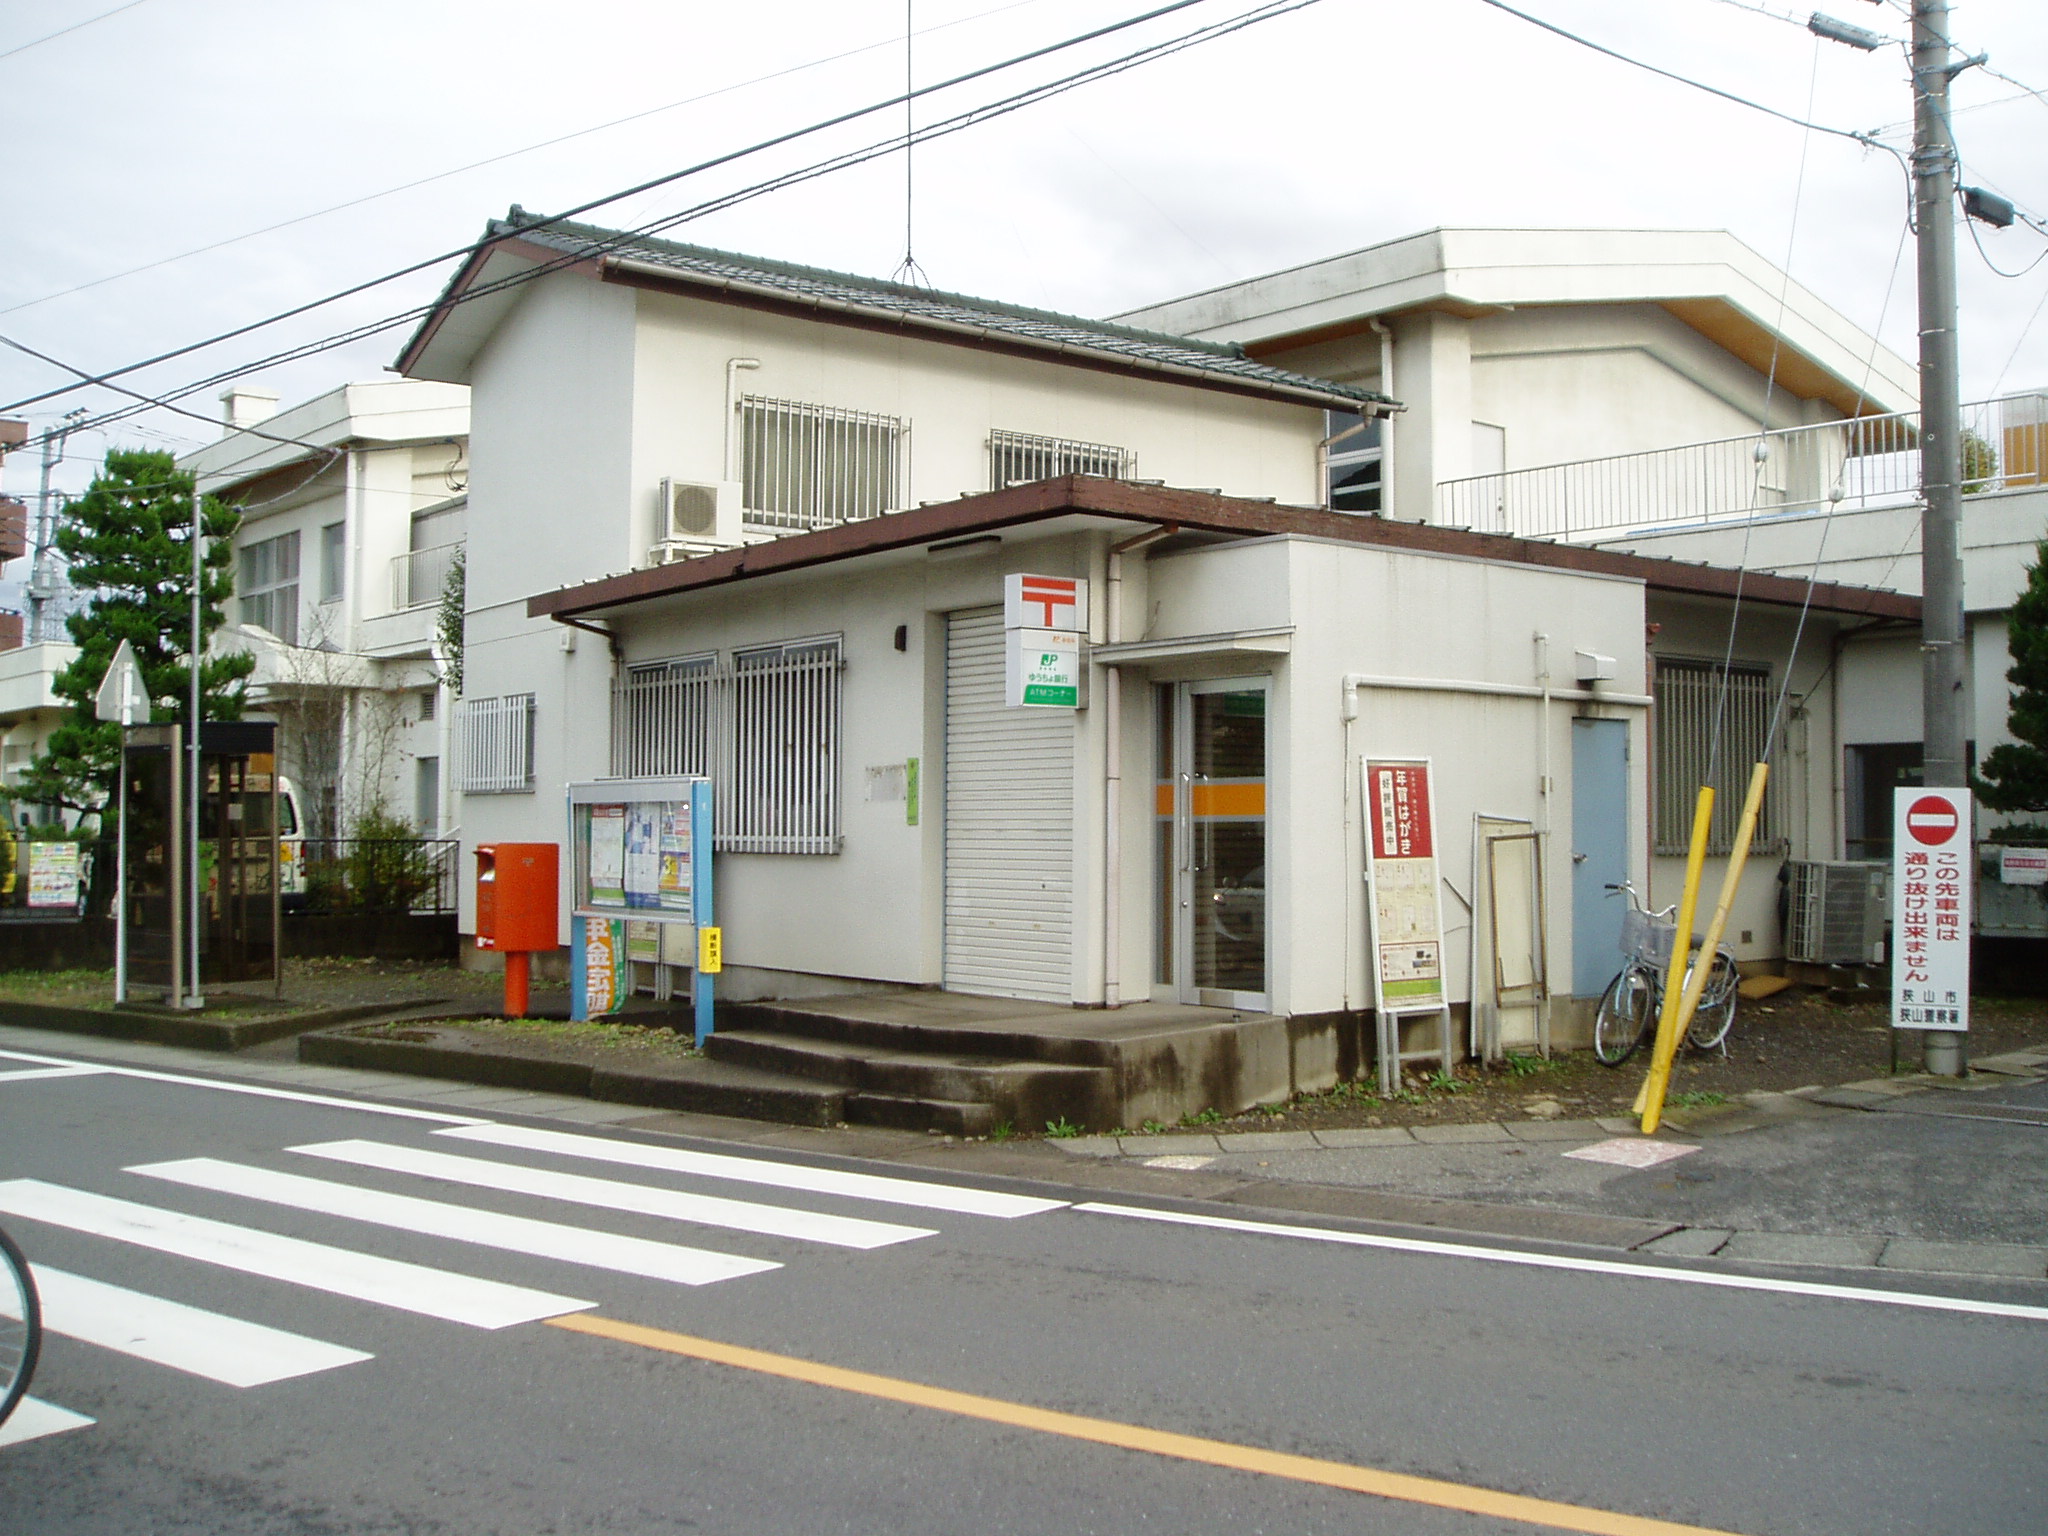 post office. 200m to Sayama input 曾郵 service stations (post office)